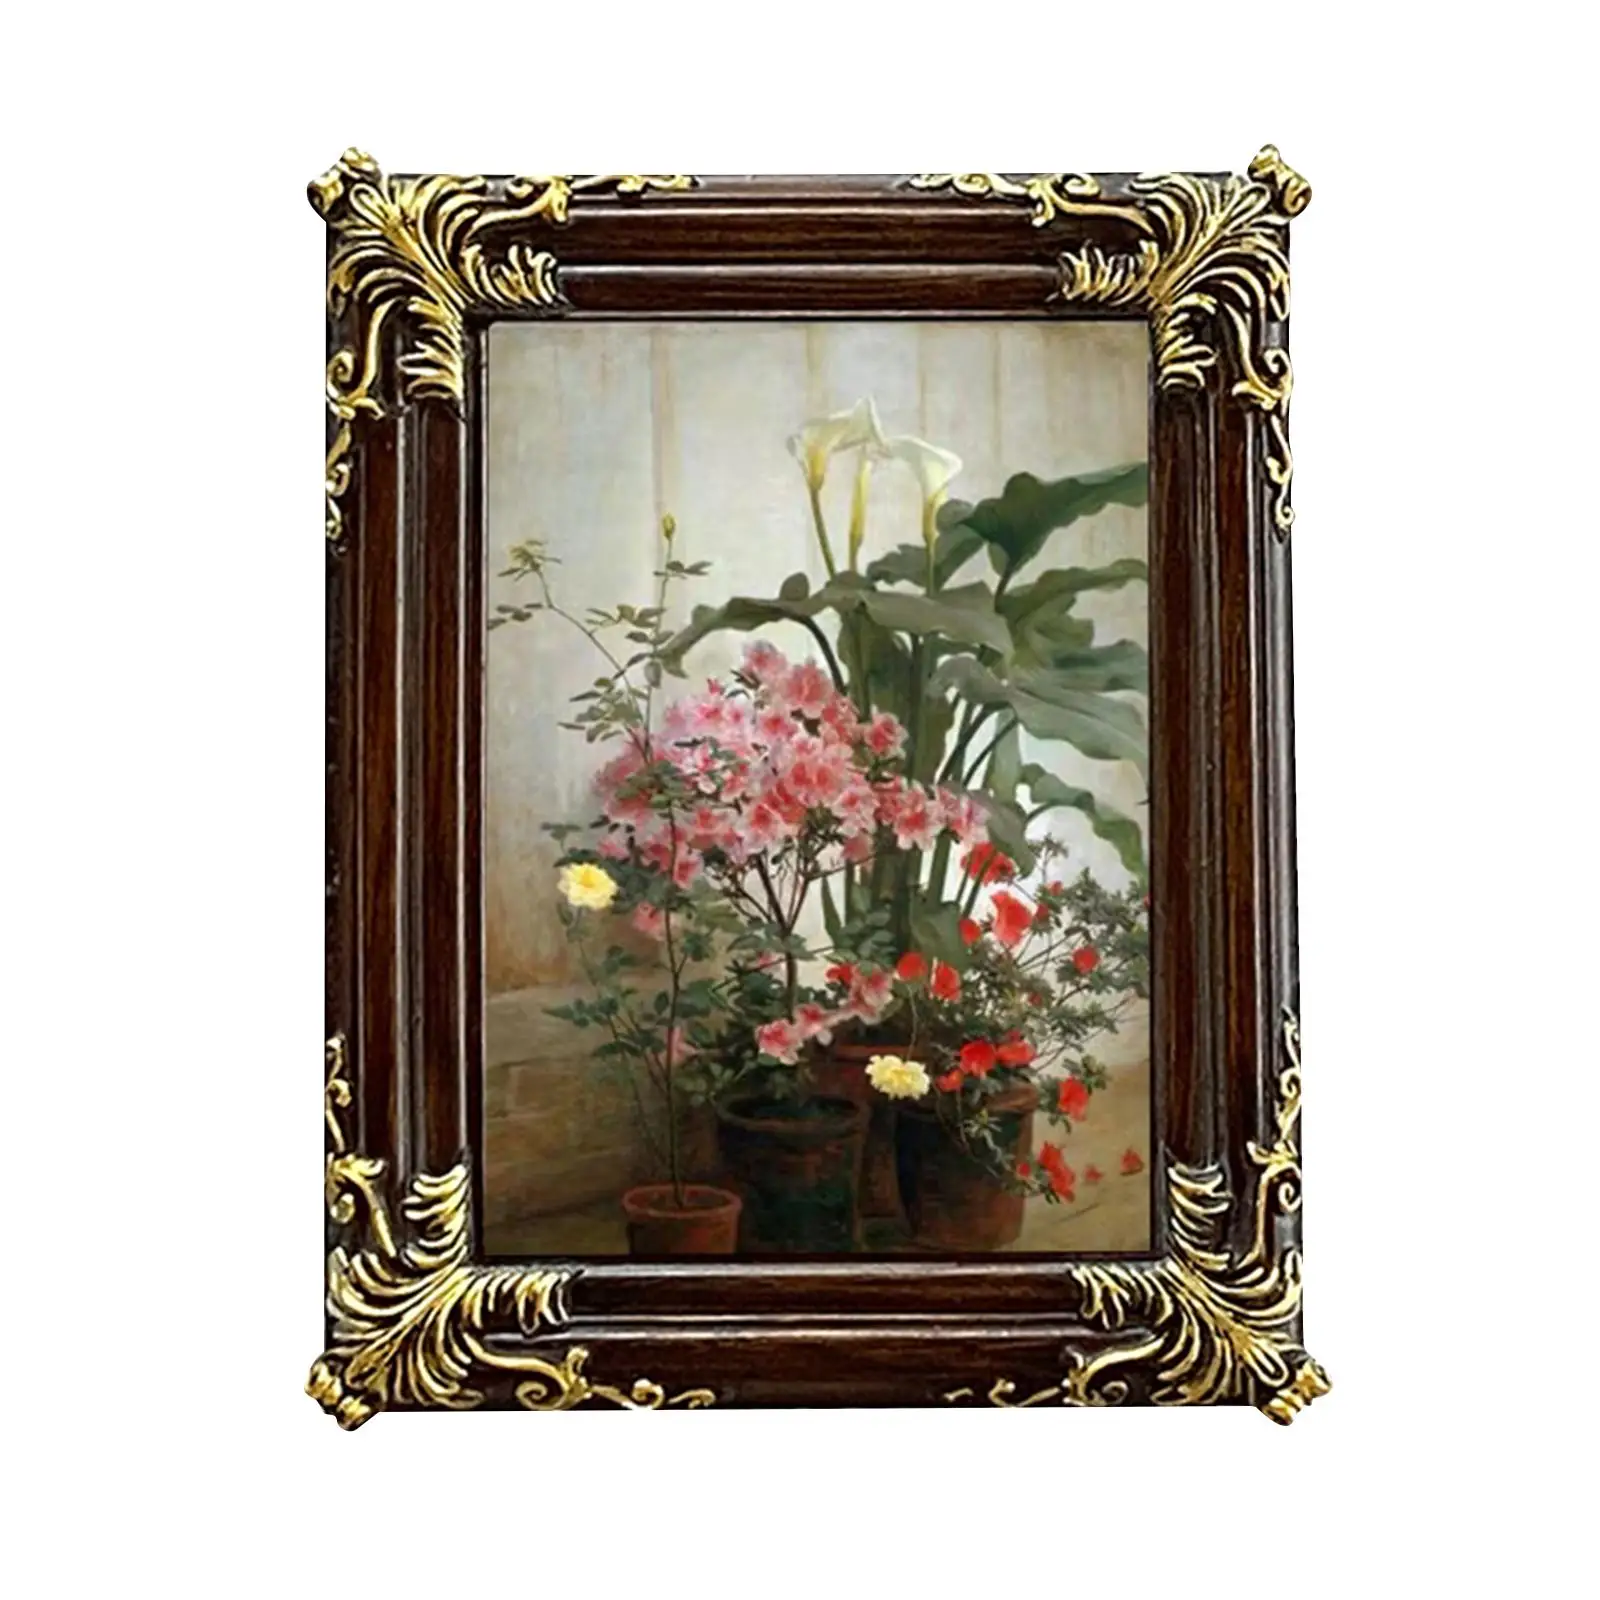 photo Frame Tabletop Wall Hanging Ornate Ornament Rectangle for Gallery Farmhouse Bedroom